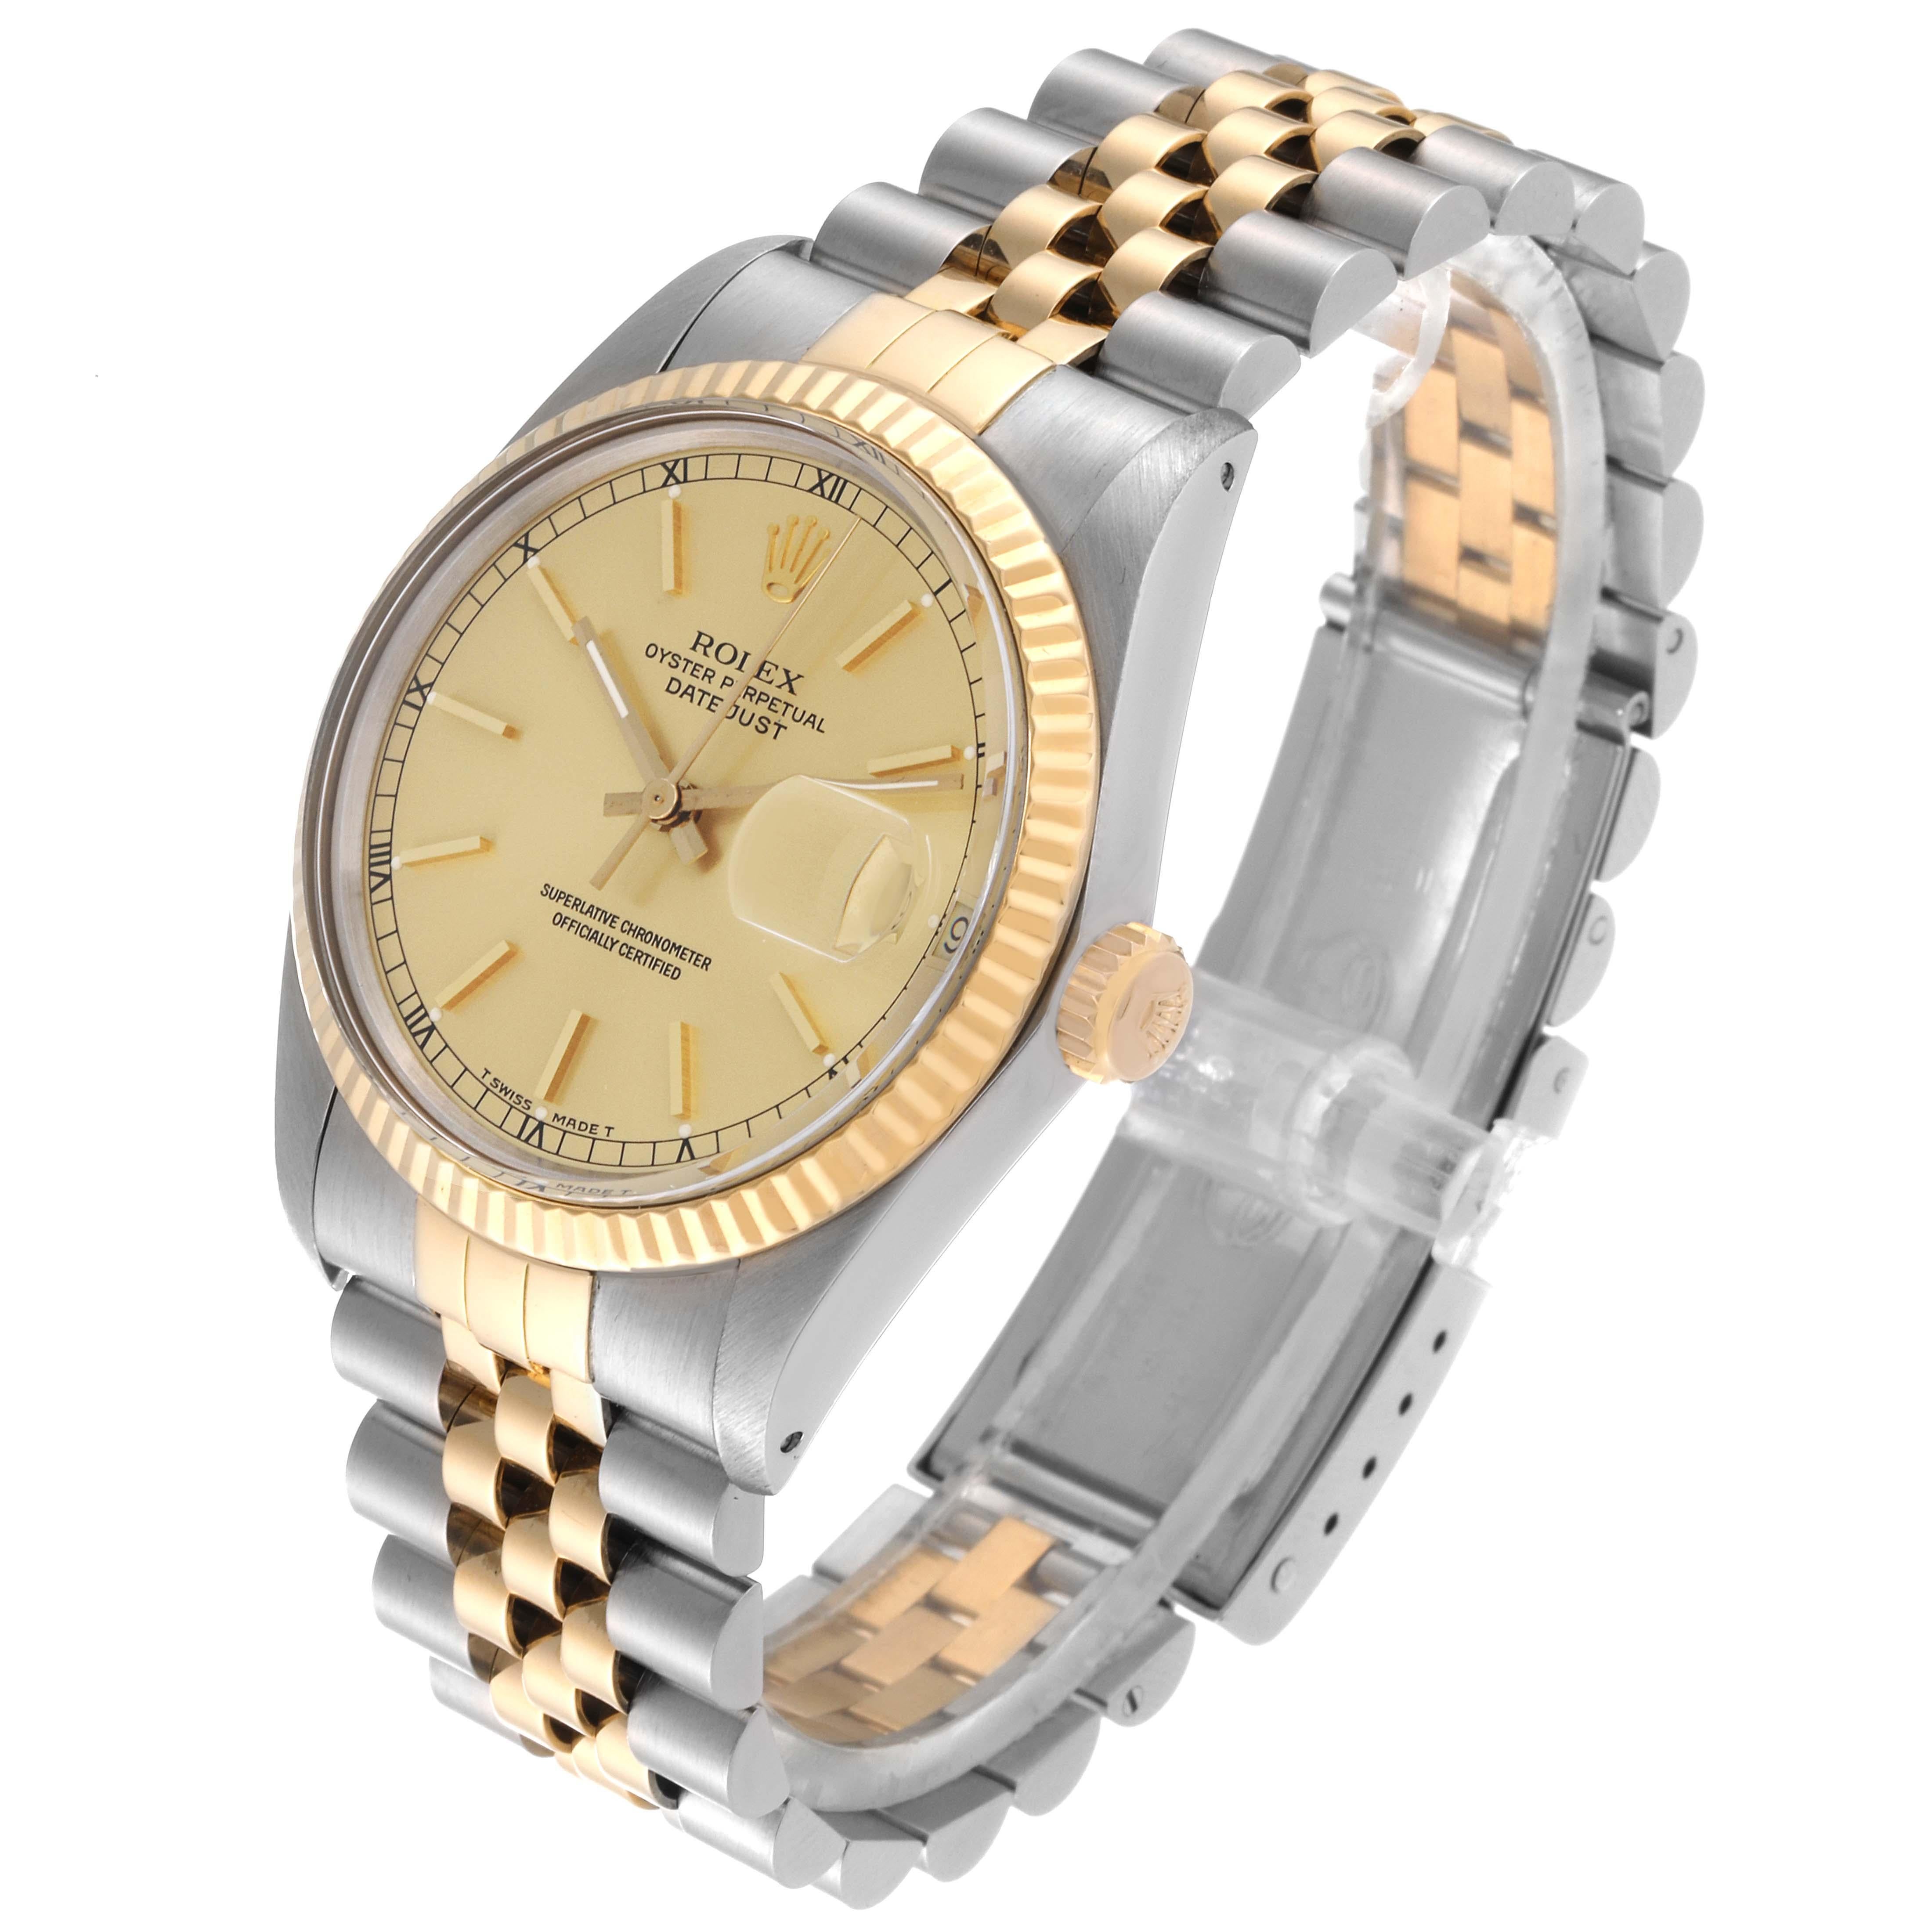 Rolex Datejust Steel Yellow Gold Vintage Mens Watch 16013 Box Card For Sale 4